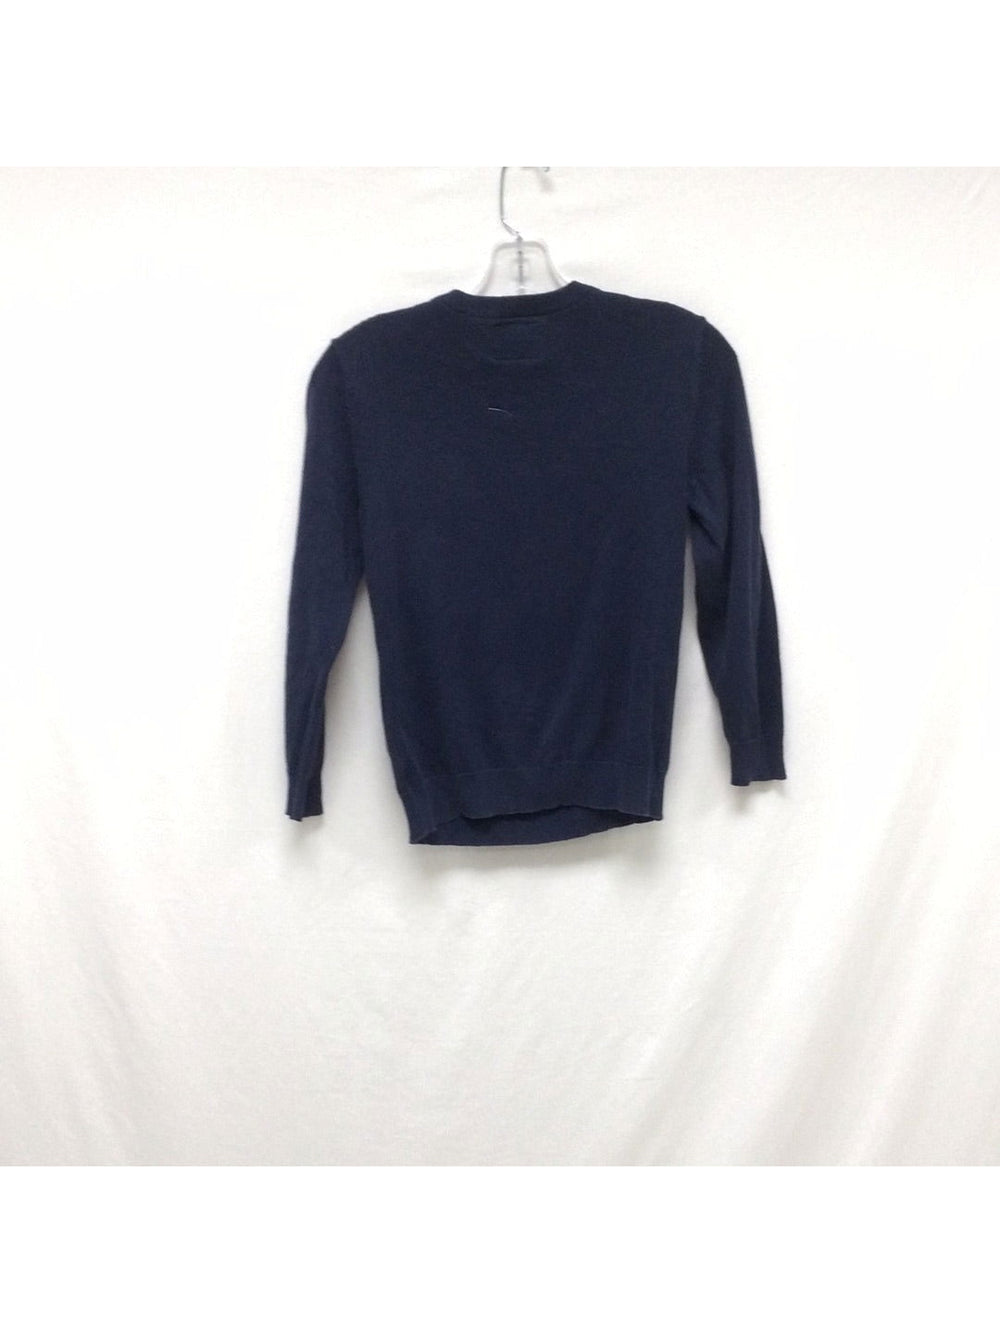 Old Navy Boy Multi Color Sweater Size Medium (8) - The Kennedy Collective Thrift - 